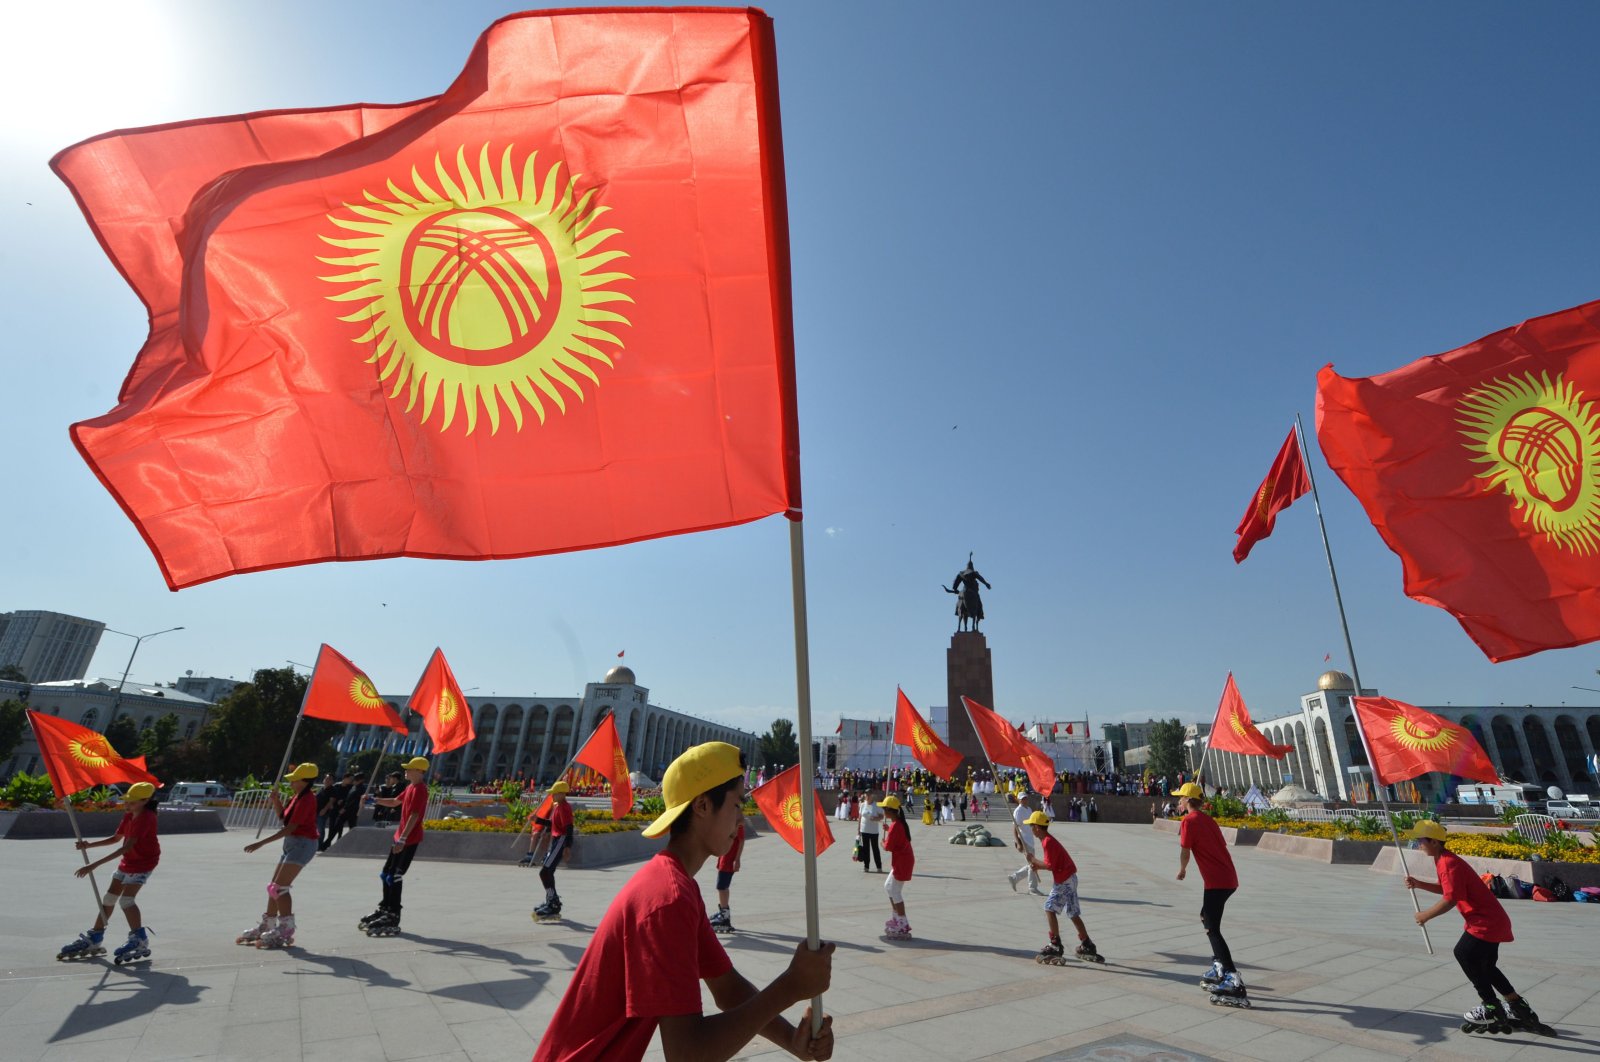 Kyrgyz dancers wave flags as they perform during the celebrations marking the 28th anniversary of Kyrgyzstan's independence from the Soviet Union at the Ala-Too square in Bishkek on August 31, 2019. (AFP Photo)